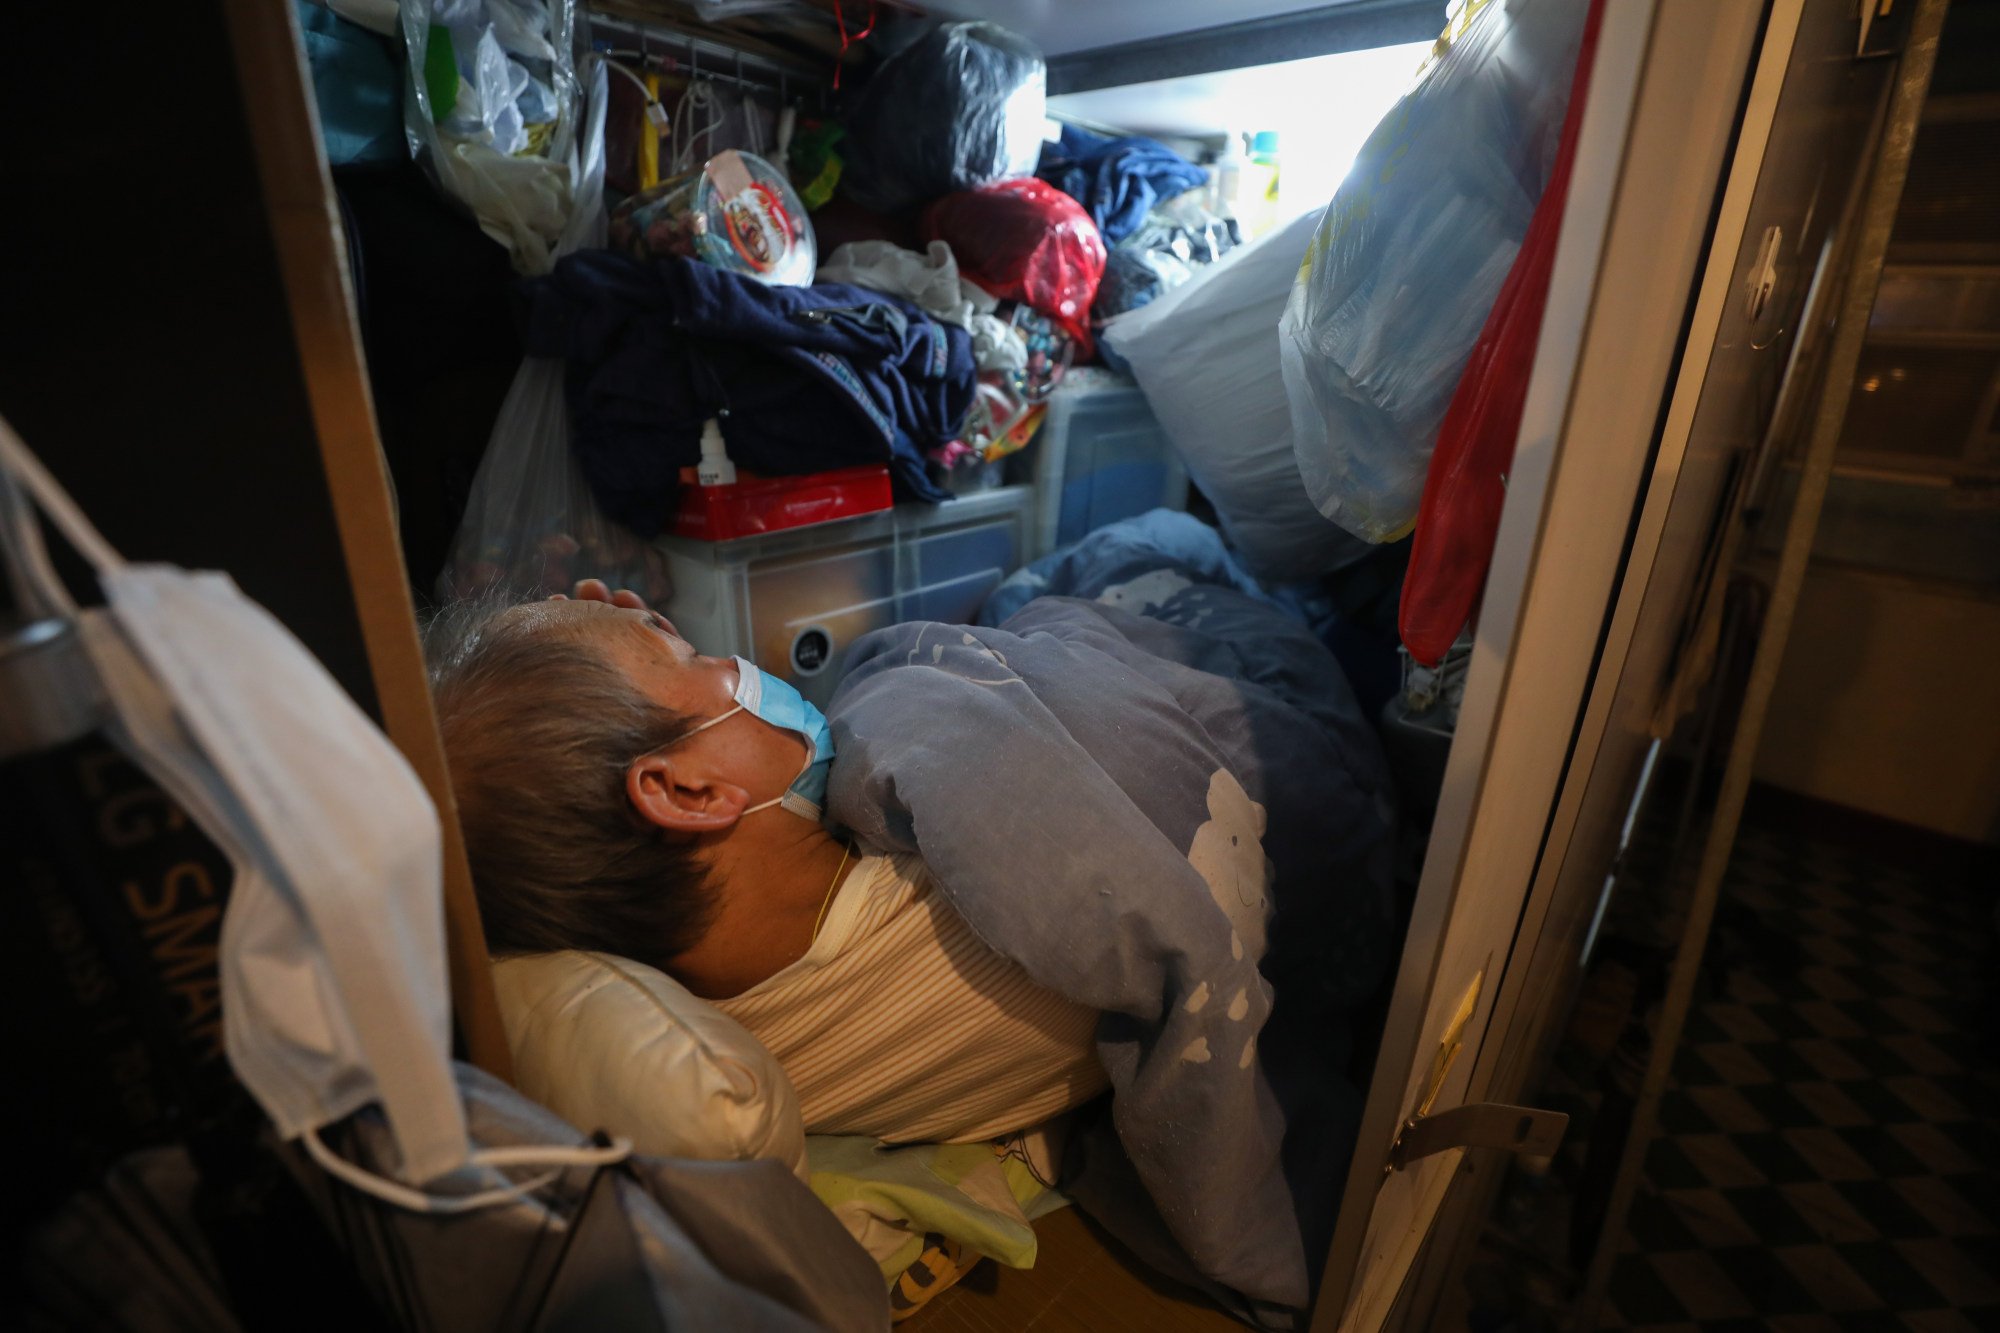 Yau Sai, 68, pays HK$2,000 a month for his limited space. Photo: Xiaomei Chen